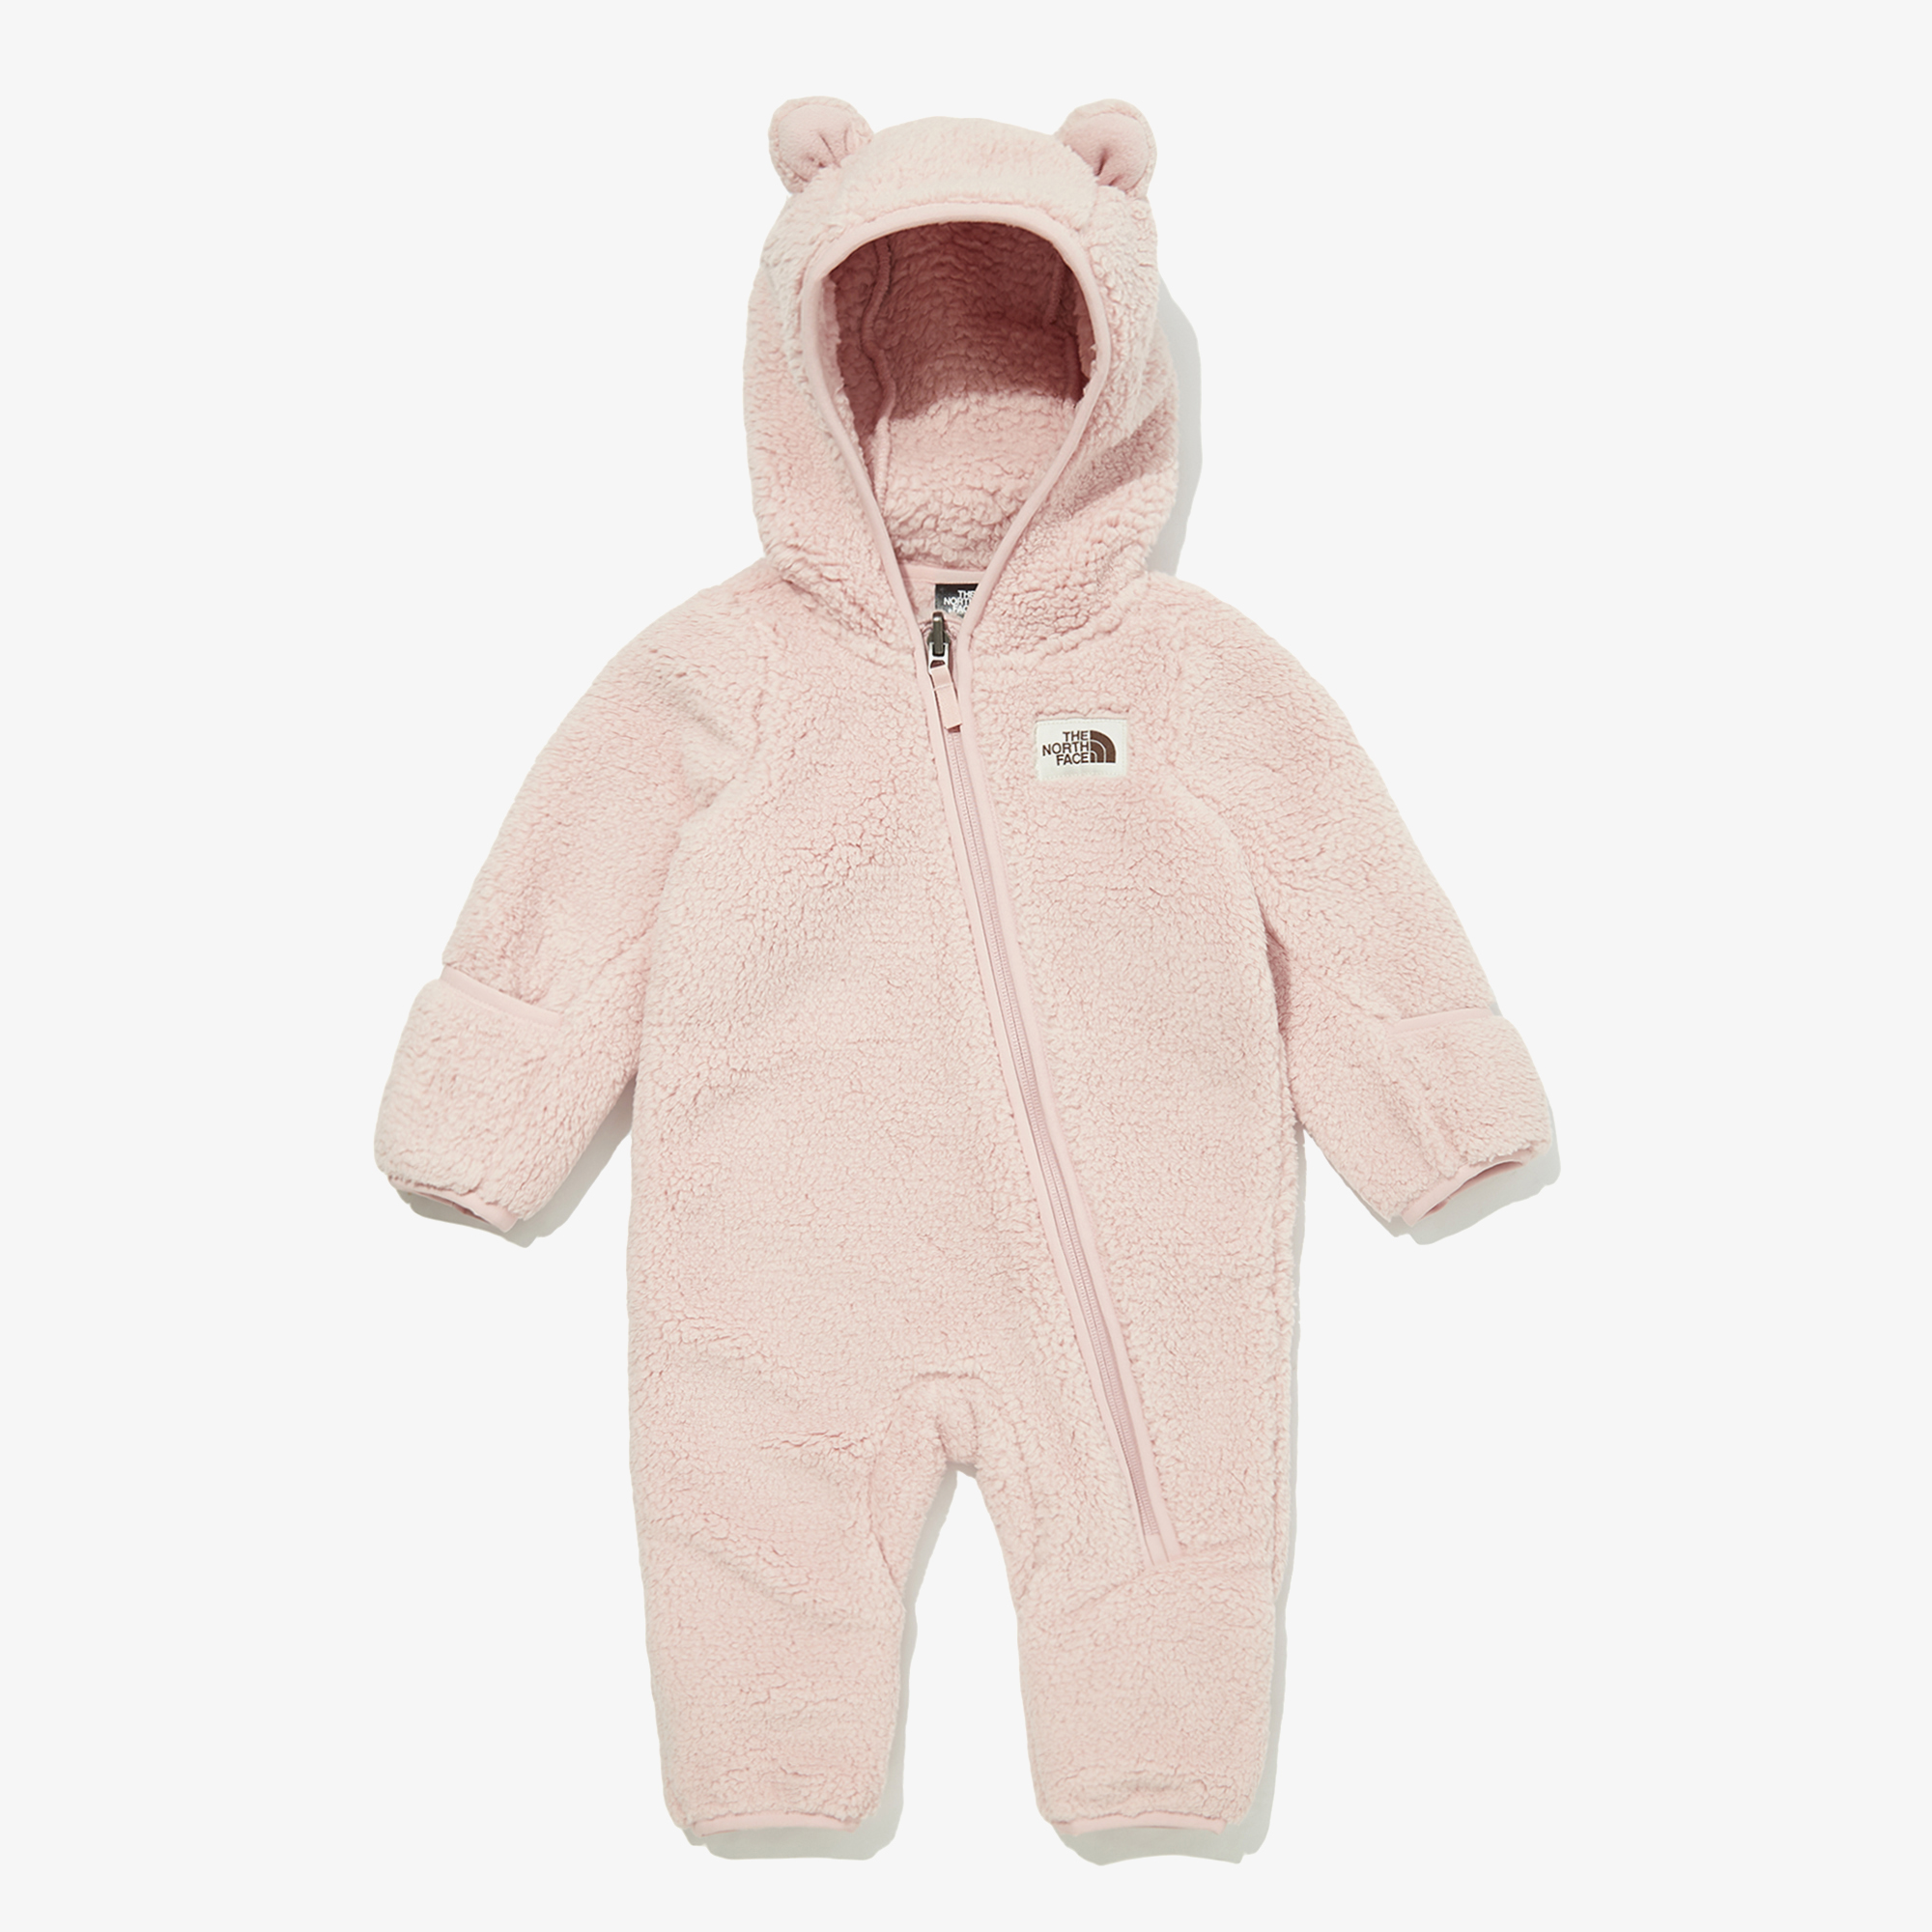 THE NORTH FACE-INFANT CAMPSHIRE ONE PIECE